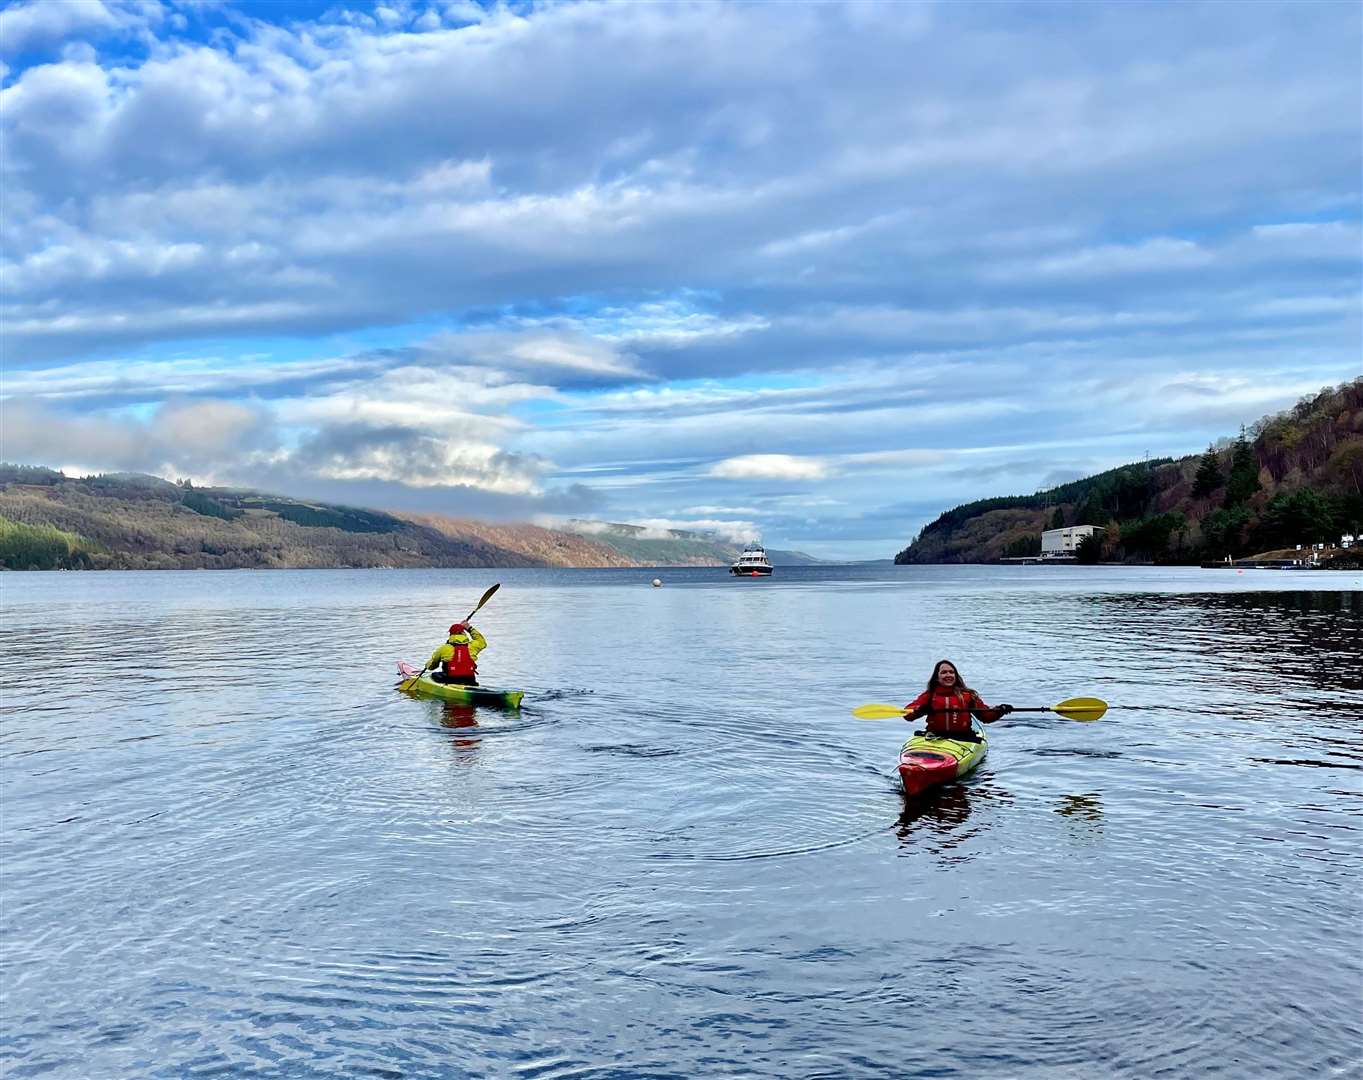 Exploring Loch Ness by kayak.